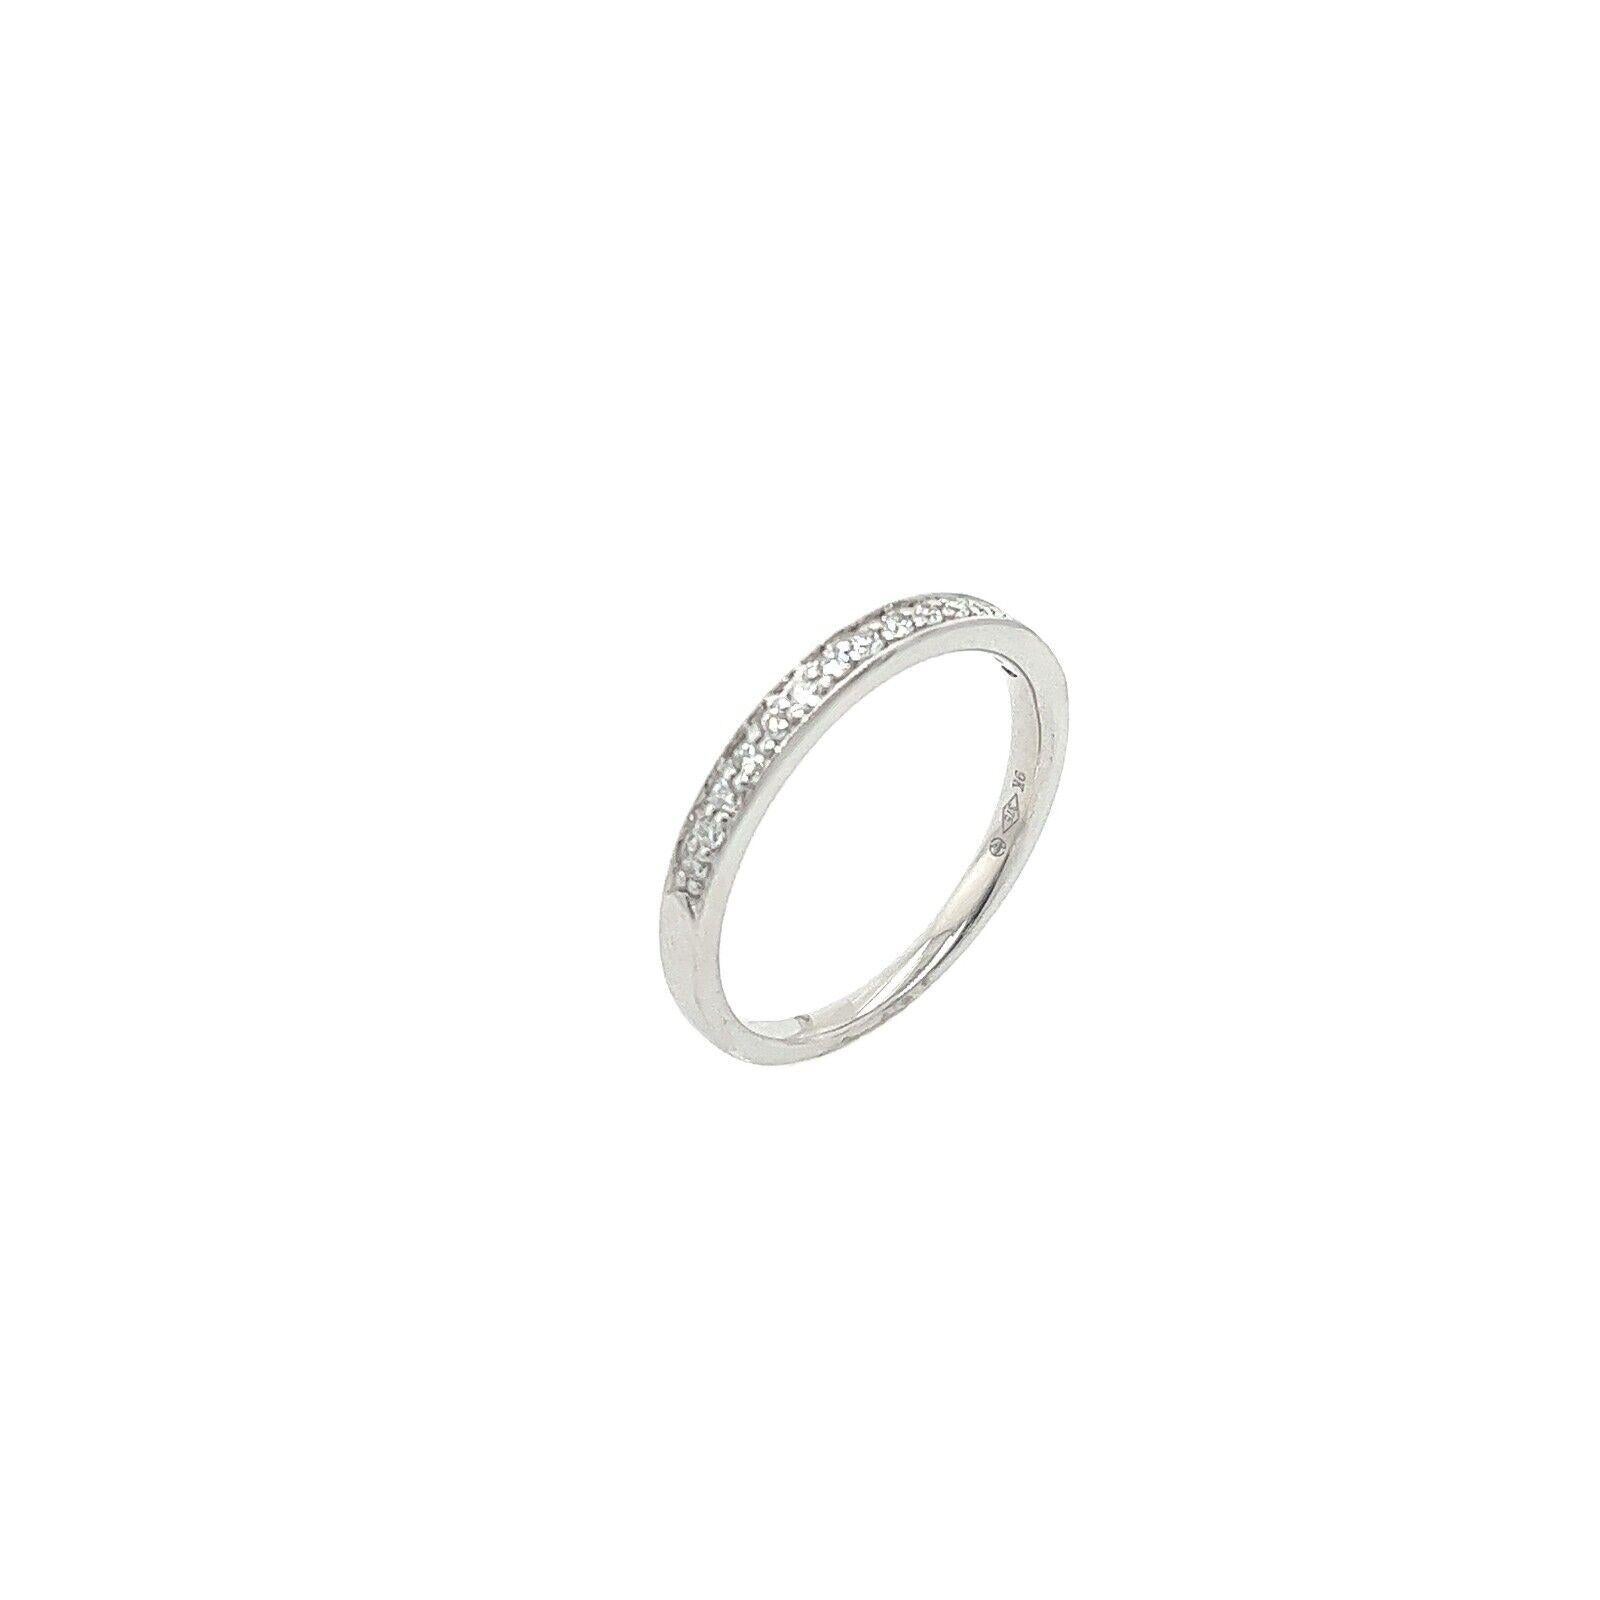 This Diamond half eternity band is set with 0.13ct round brilliant cut Diamonds. This ring is elegant and beautiful for wedding ring, set in 9ct White Gold.

Additional Information:
Total Diamond Weight: 0.13ct 
Diamond Colour: G/H
Diamond Clarity: